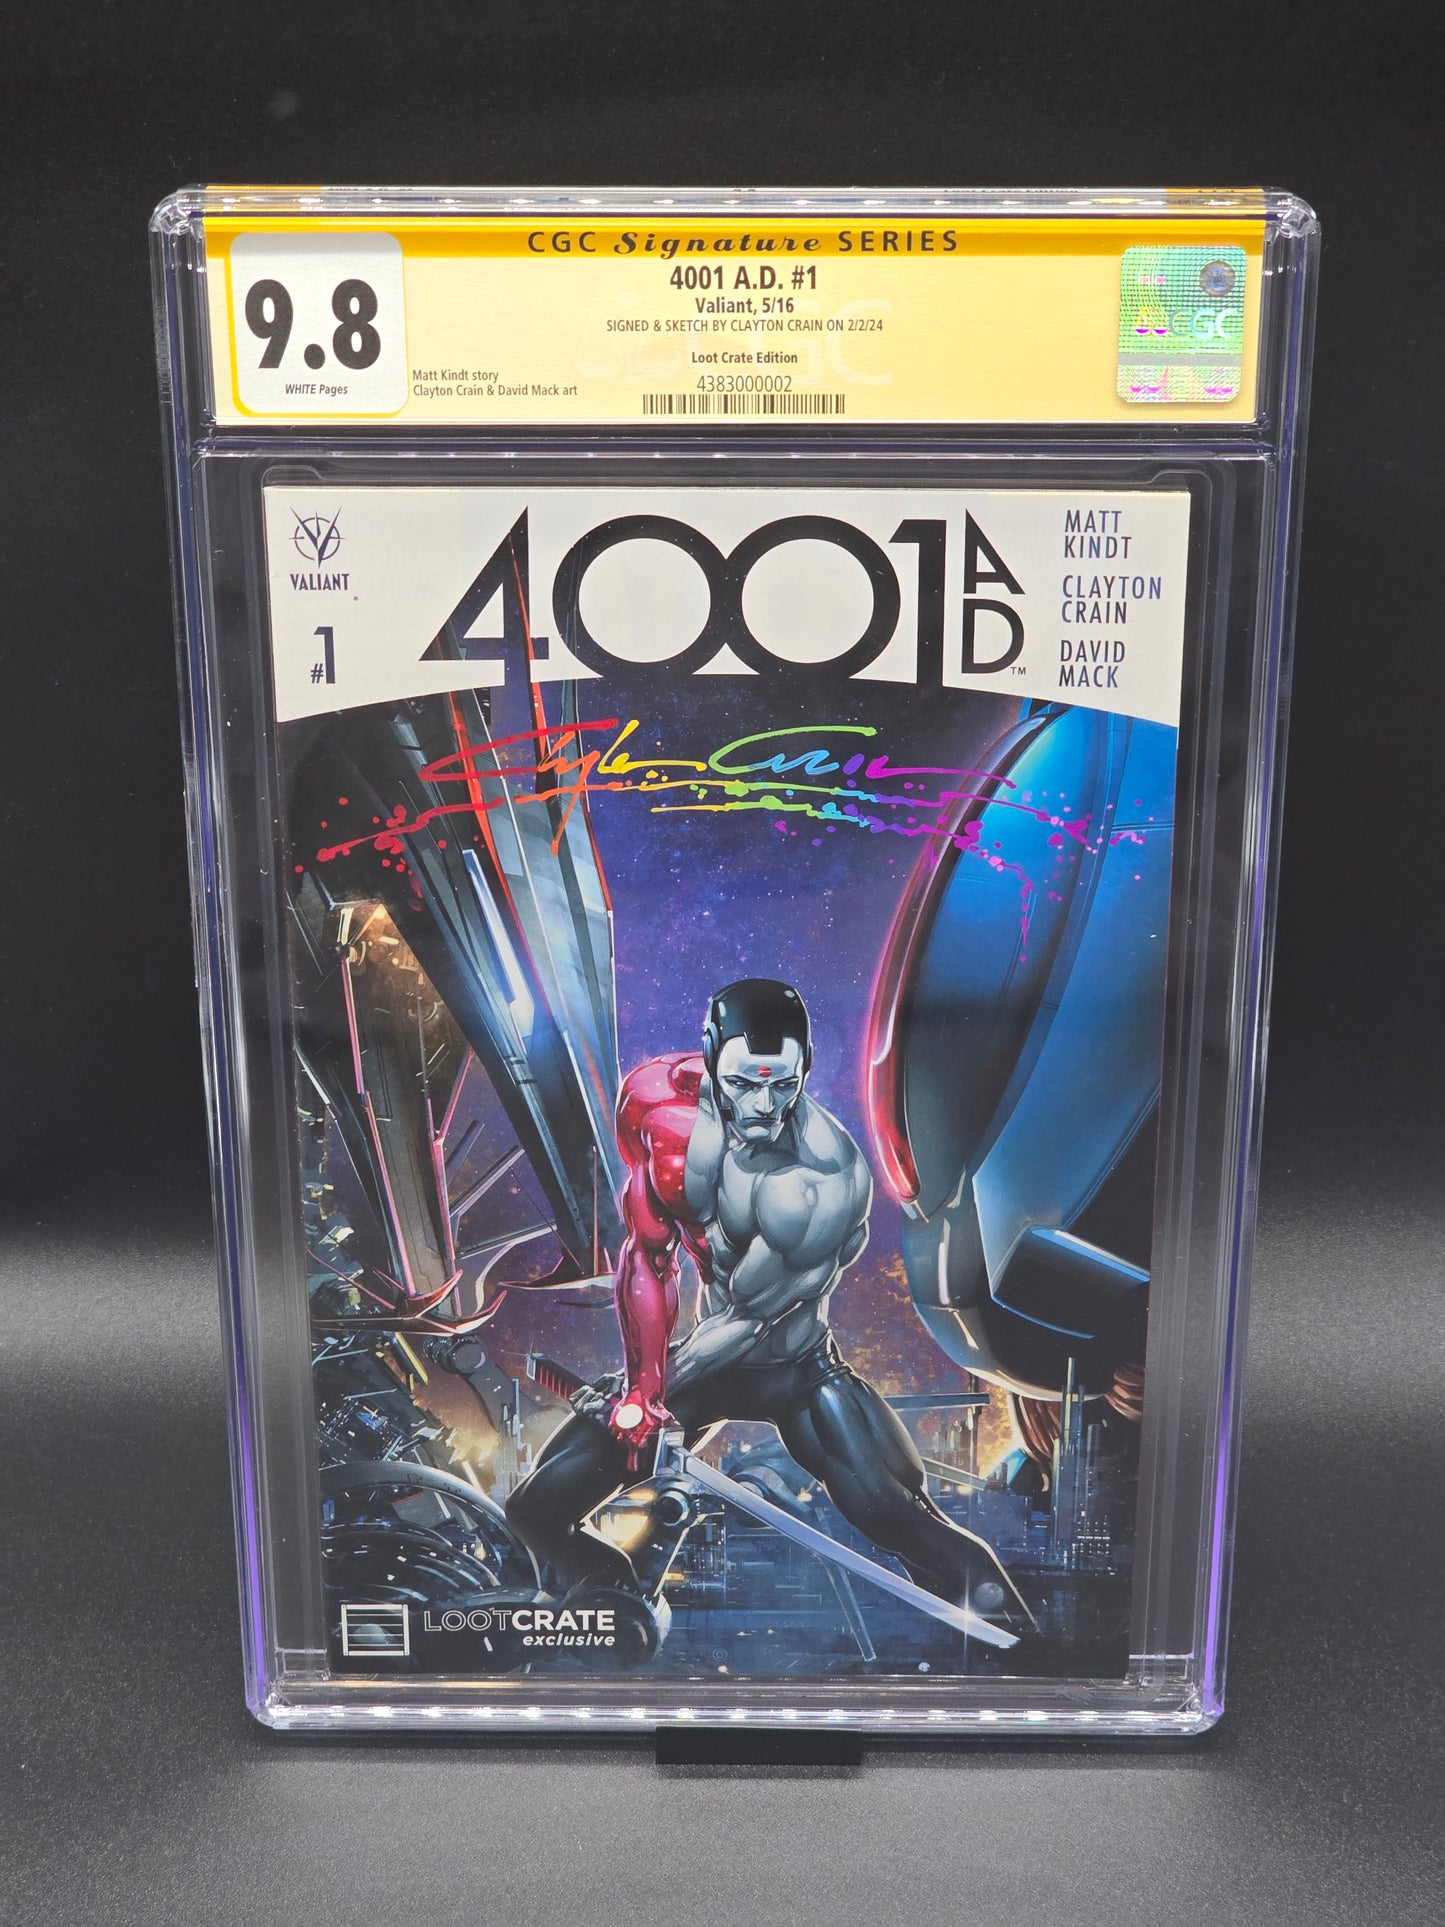 4001 A.D. #1 5/16 Loot Crate exclusive CGC SS 9.8 signed and sketch by Clayton Crain